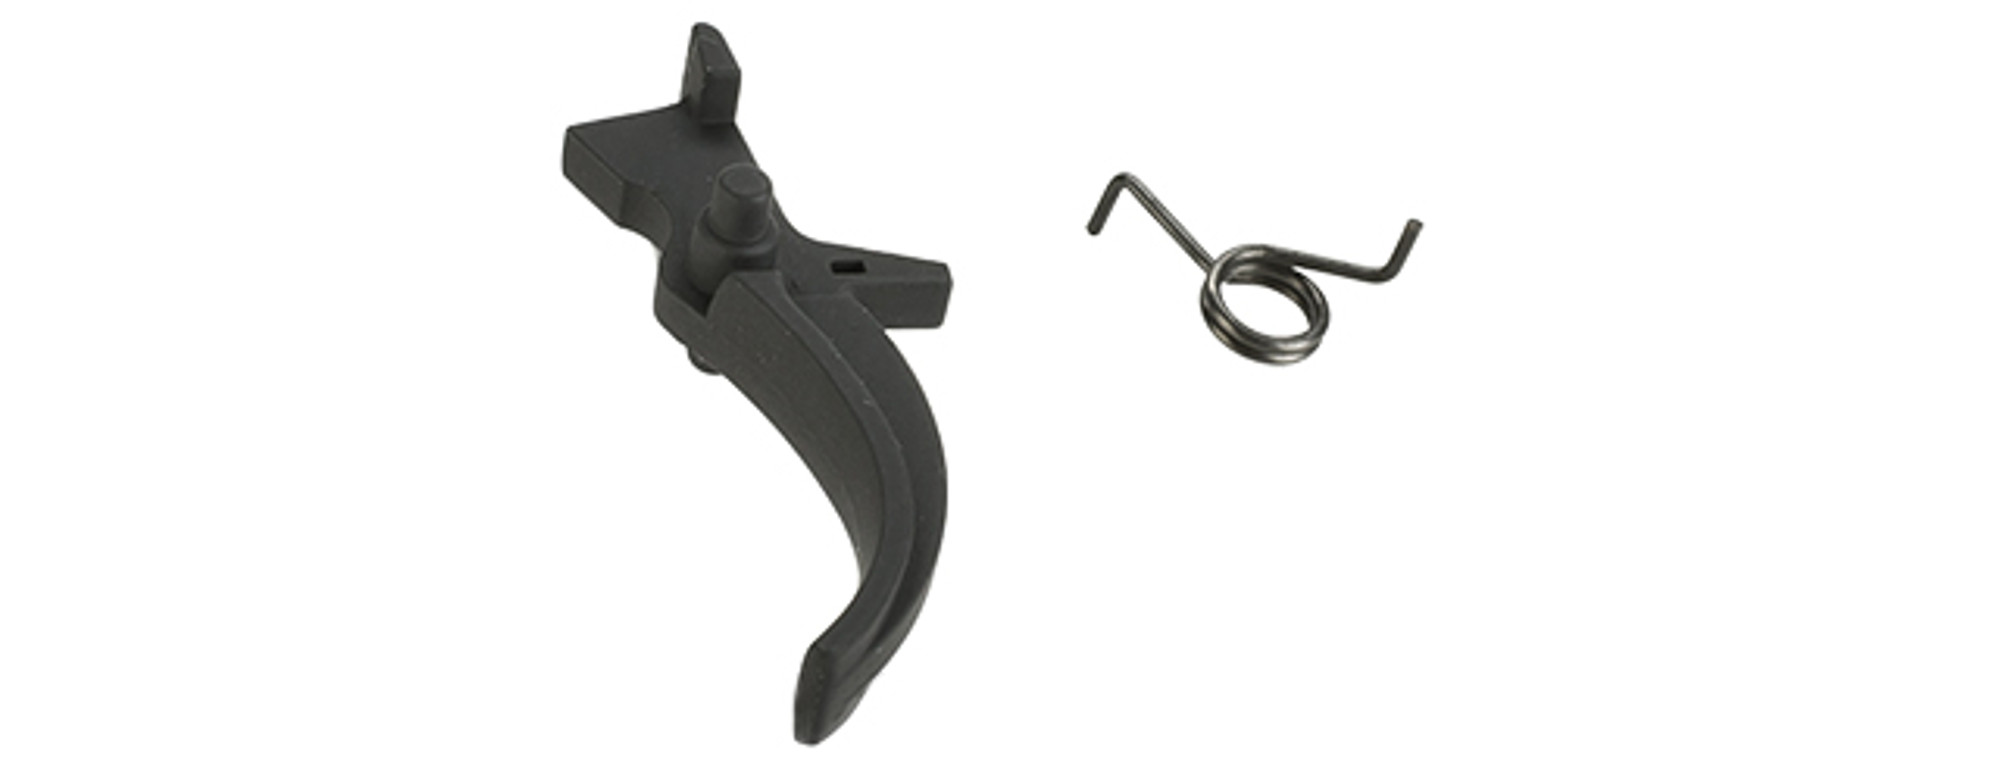 G&P Reinforced AR-15 Type Metal Trigger for M4 M16 Series Airsoft AEG Rifle